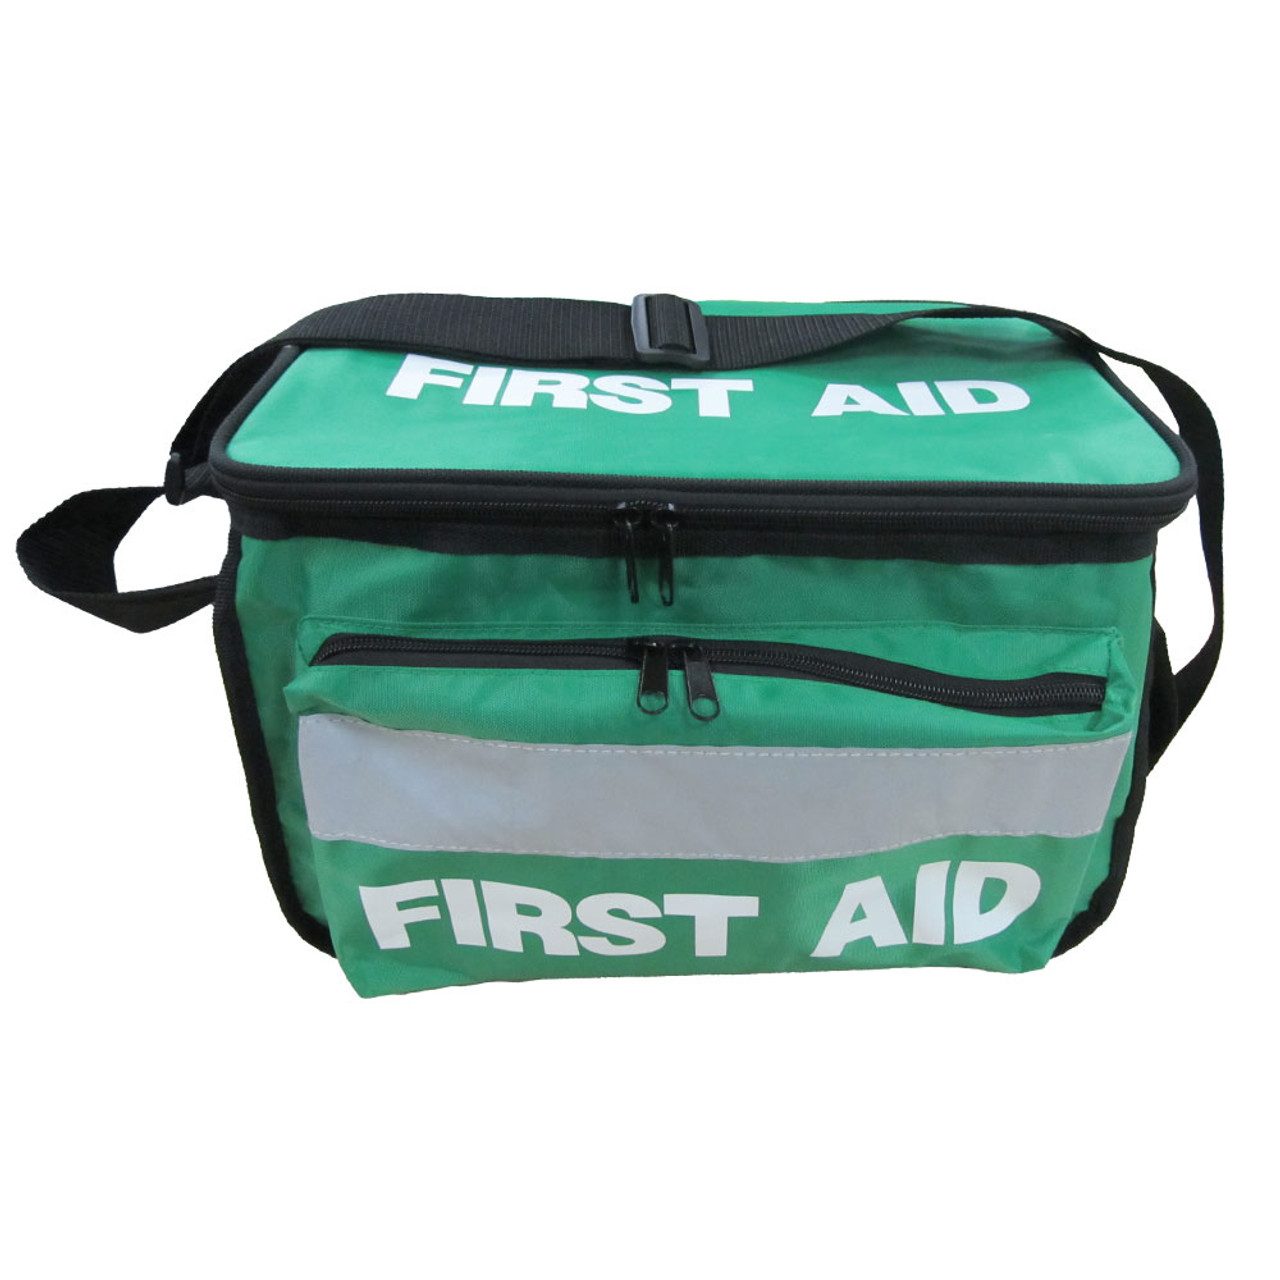 DS Medical Heavy Duty First Aid Bag (Unkitted)